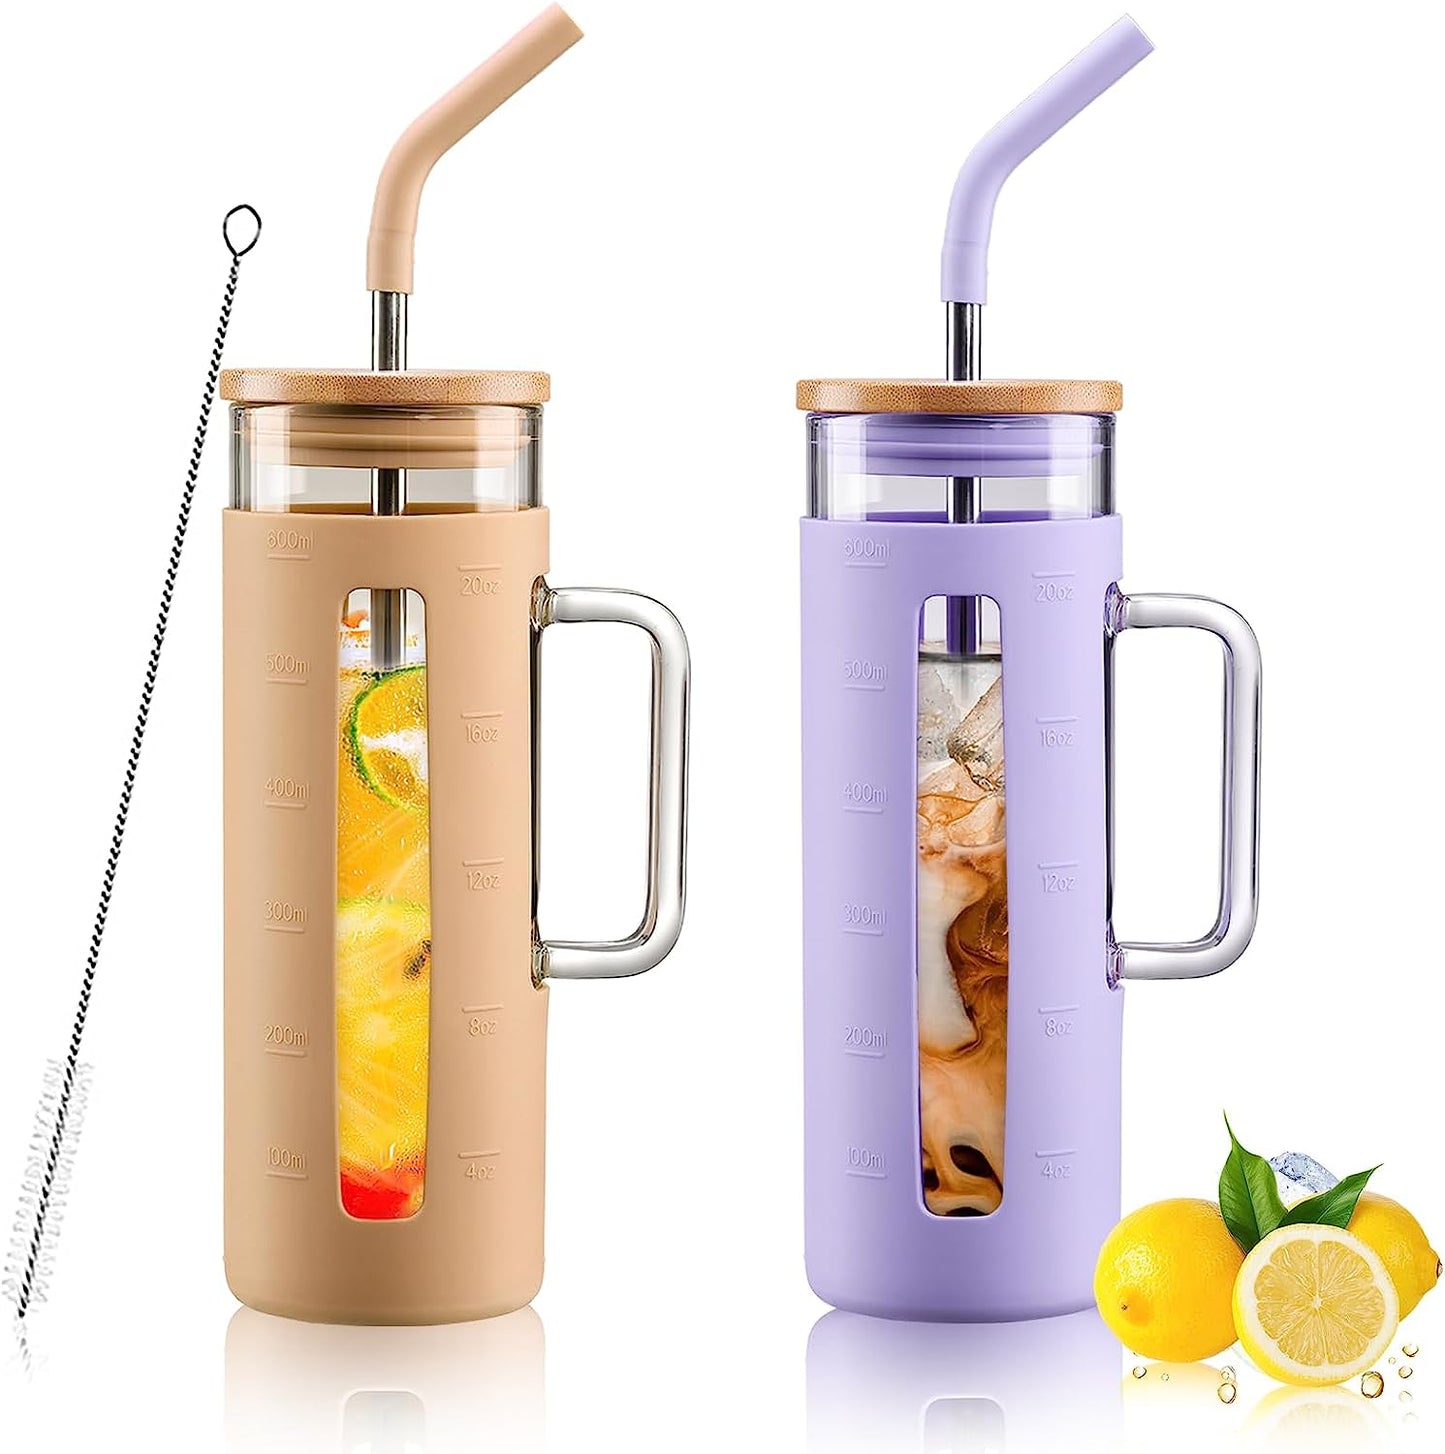 20 oz Glass Coffee Tumbler with Handle, Smoothie Cup with Bamboo Lid | Time Marker | Silicone Protective Sleeve, BPA Free - Amber & Purple